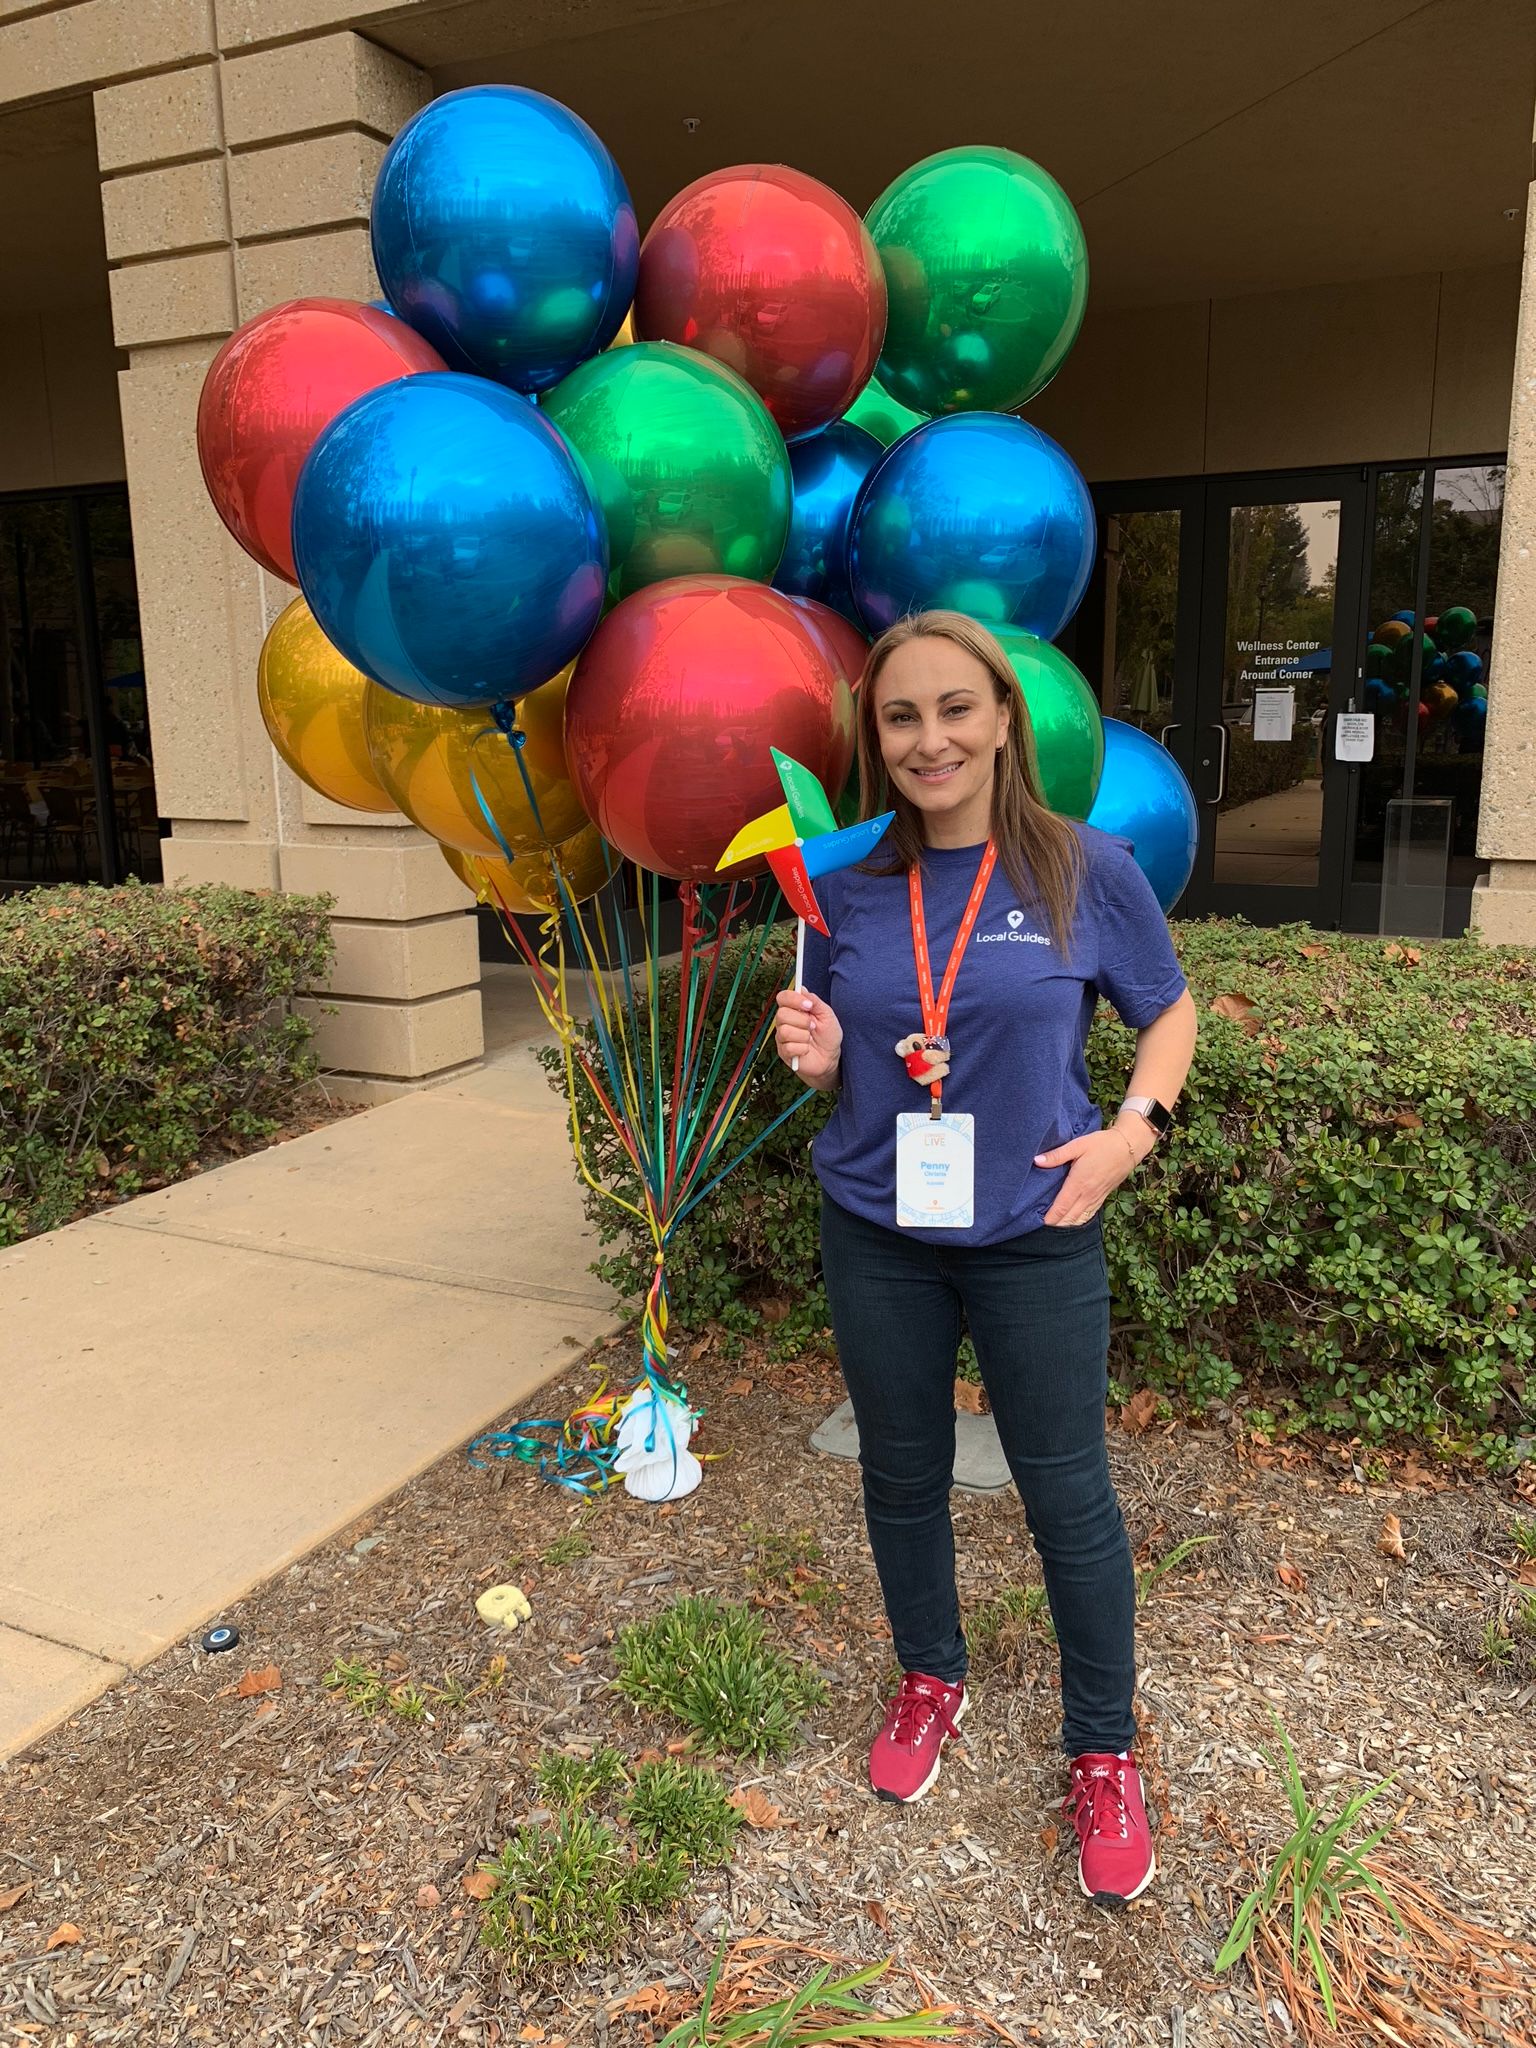 Caption: A photo of Penny Christie posing in front of blue, red, green, and yellow balloons at  Google headquarters during Connect Live 2018. (Local Guide @PennyChristie)